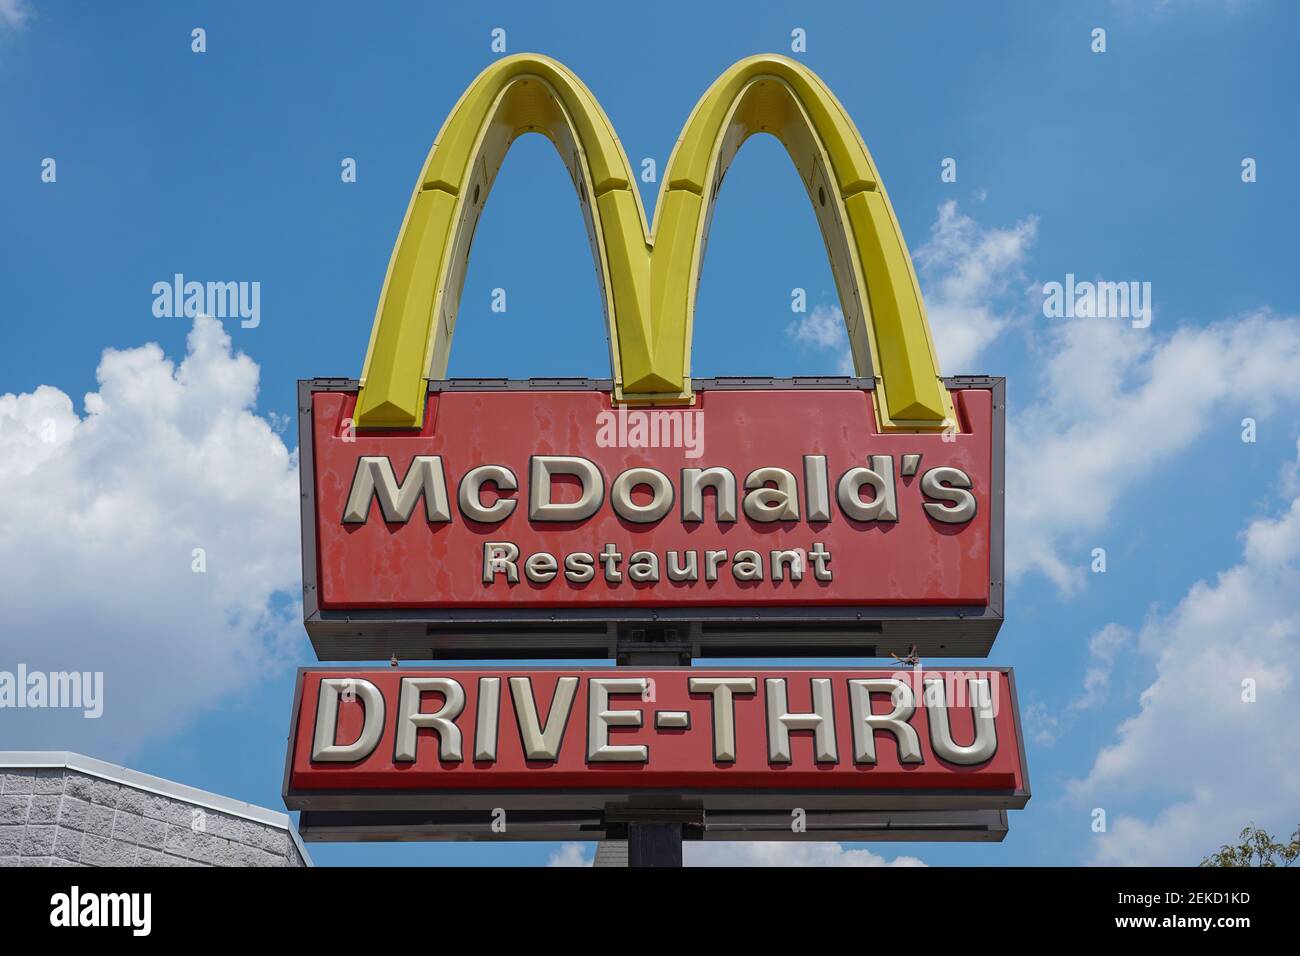 A View Of Mcdonald S Restaurant In Queens Borough Of New York City Mcdonald S Plans To Hire 260 000 People This Summer In The United States As It Begins To Resume Normal Operations Mcdonald S